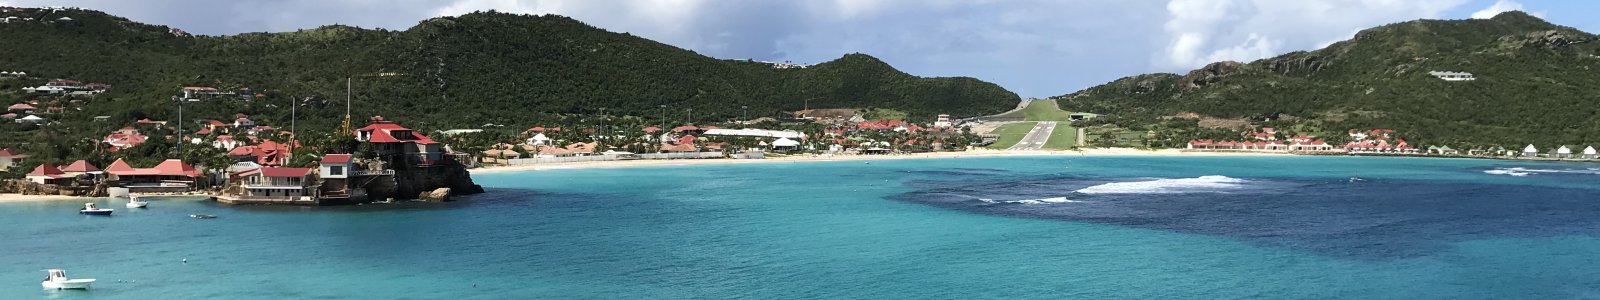 St. Barts Events & Activities for Visitors